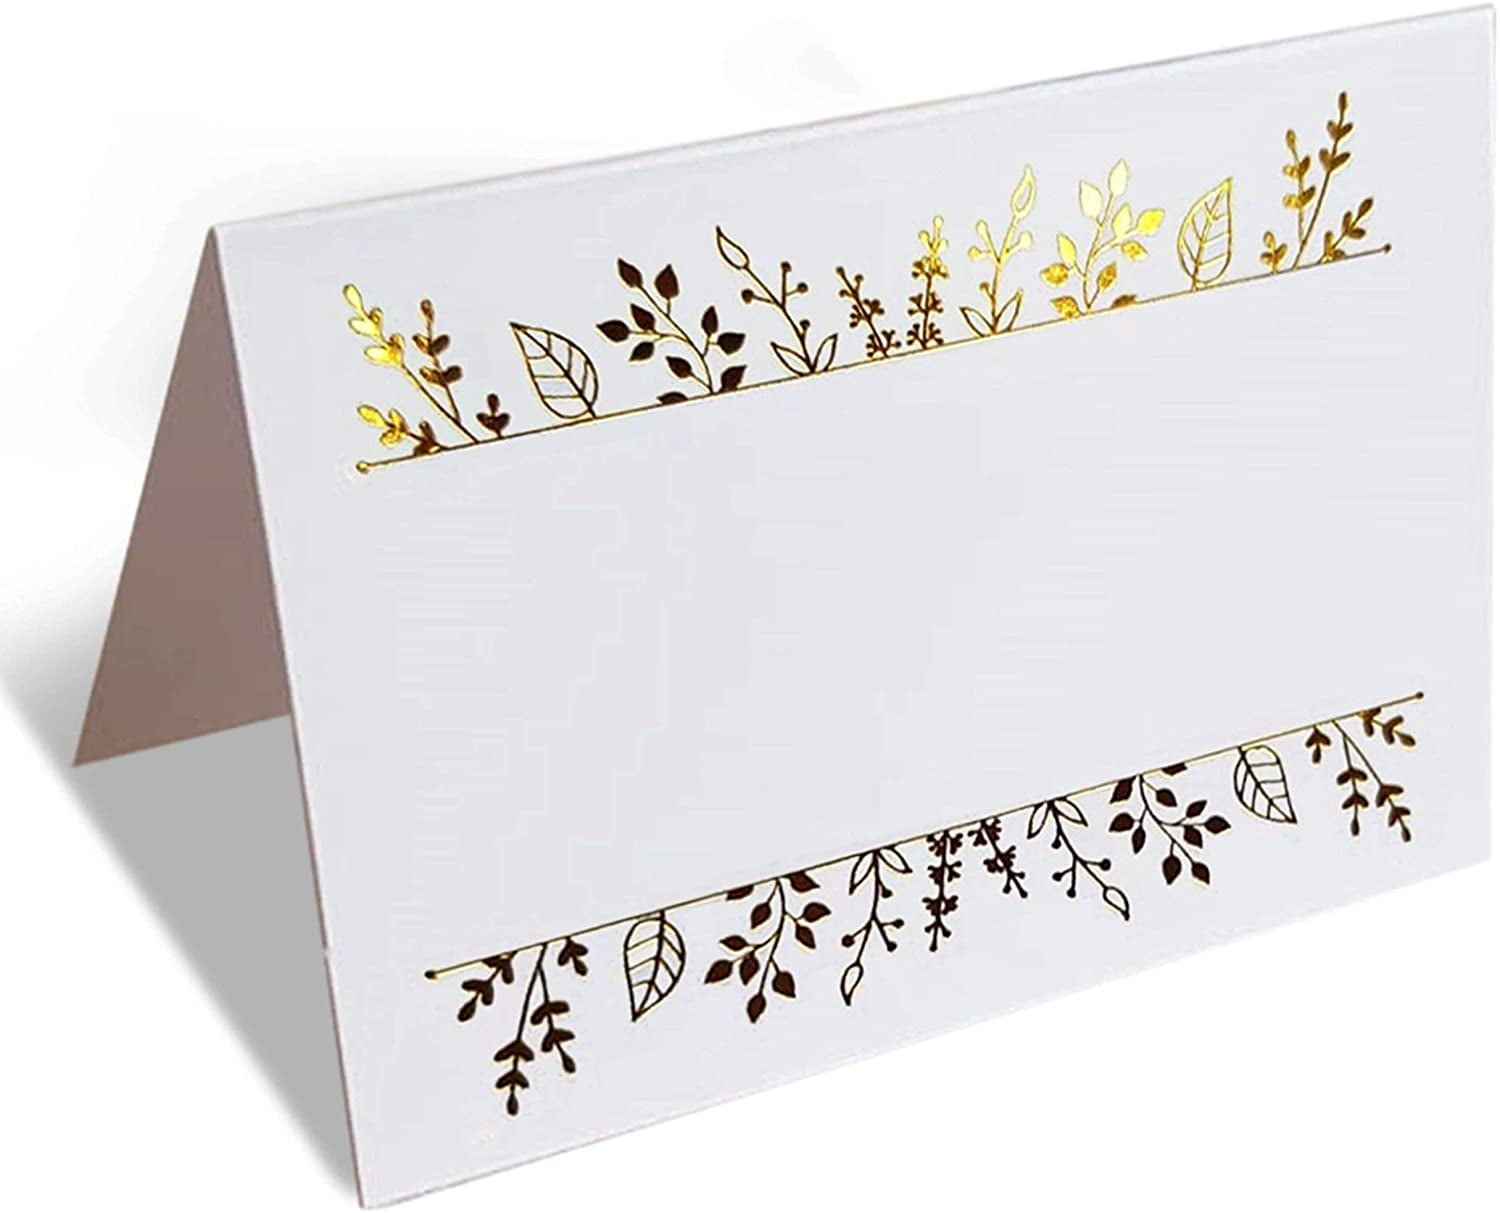 Small Tent Cards with Gold Foil Border Events 2 x 3.5 Inches Perfect for Weddings JABINCO Pack of 100 Place Cards Banquets